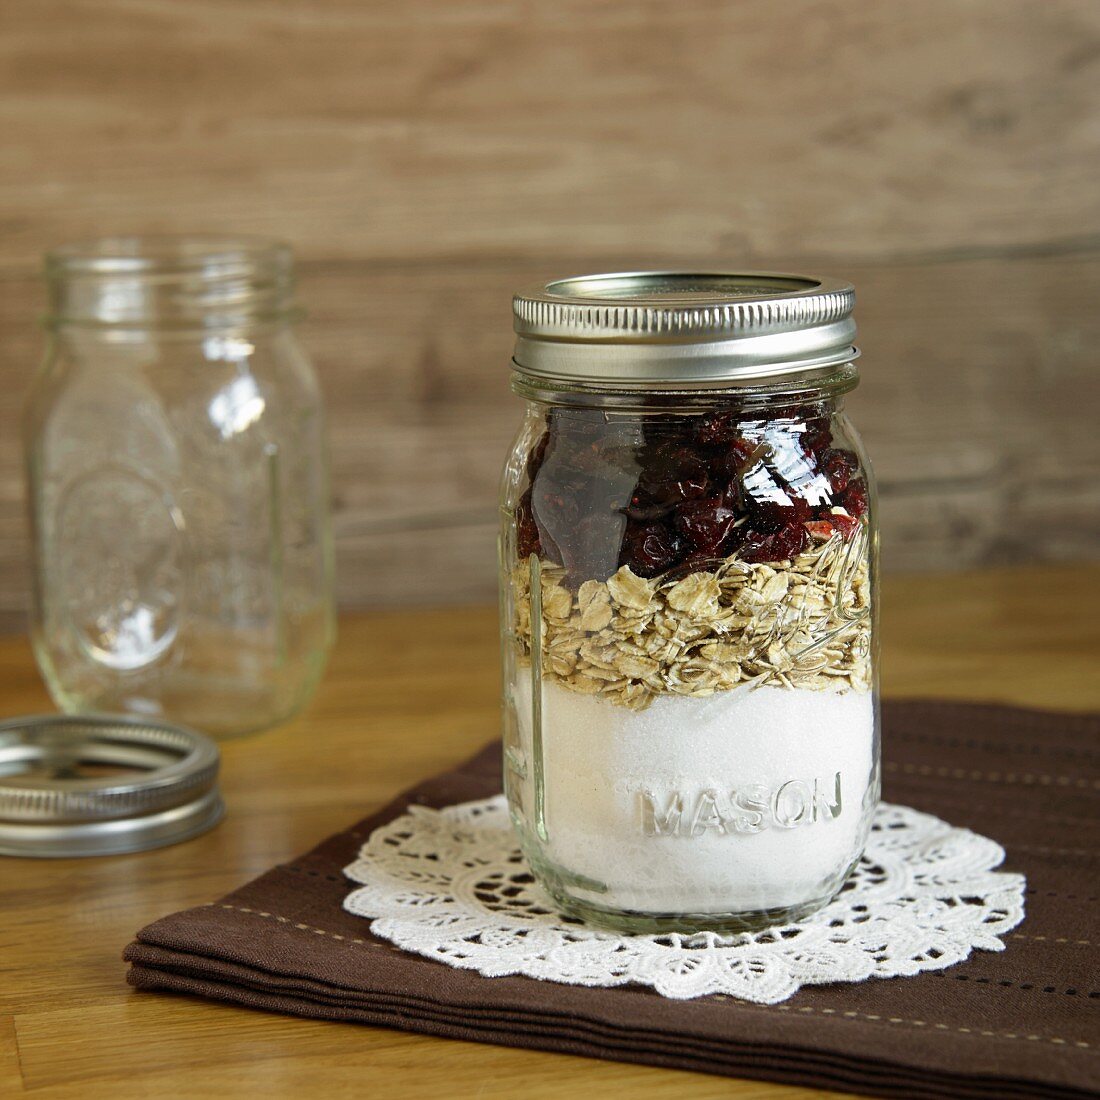 A jar containing dry ingredients for making oatmeal and cranberry biscuits